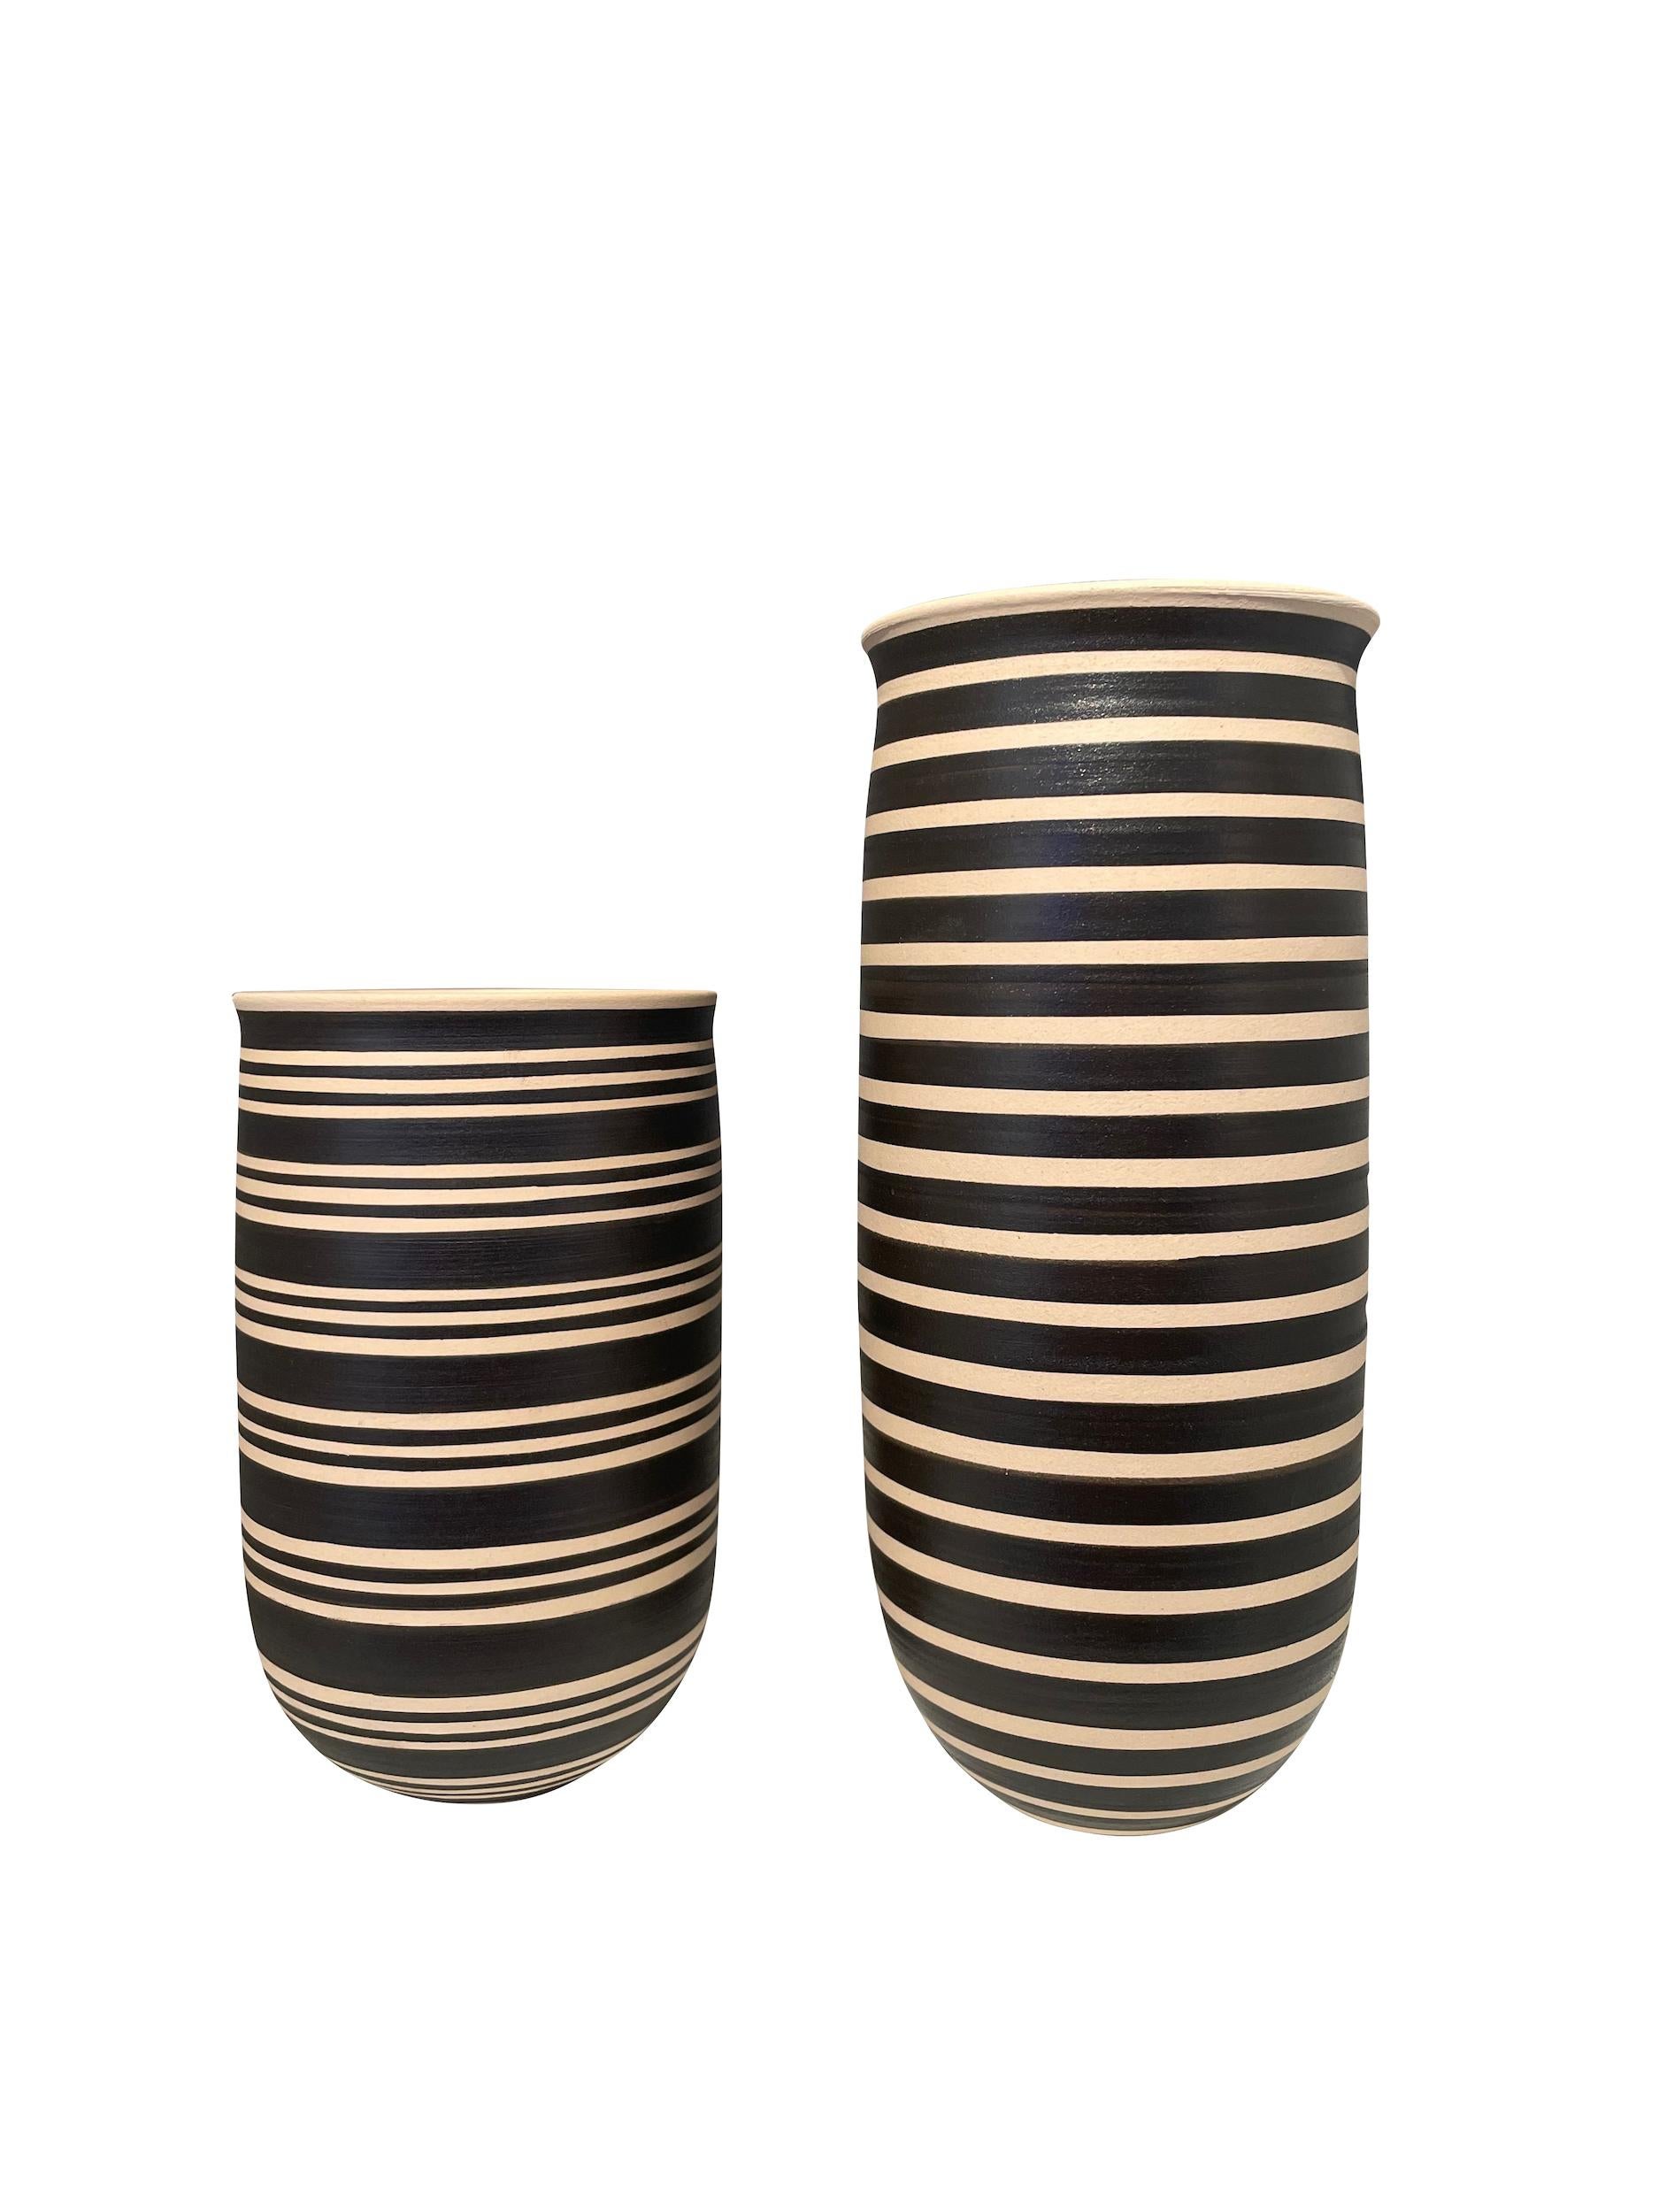 Black And Cream Tall Wide Band Stripe Vase, Turkey, Contemporary In New Condition For Sale In New York, NY